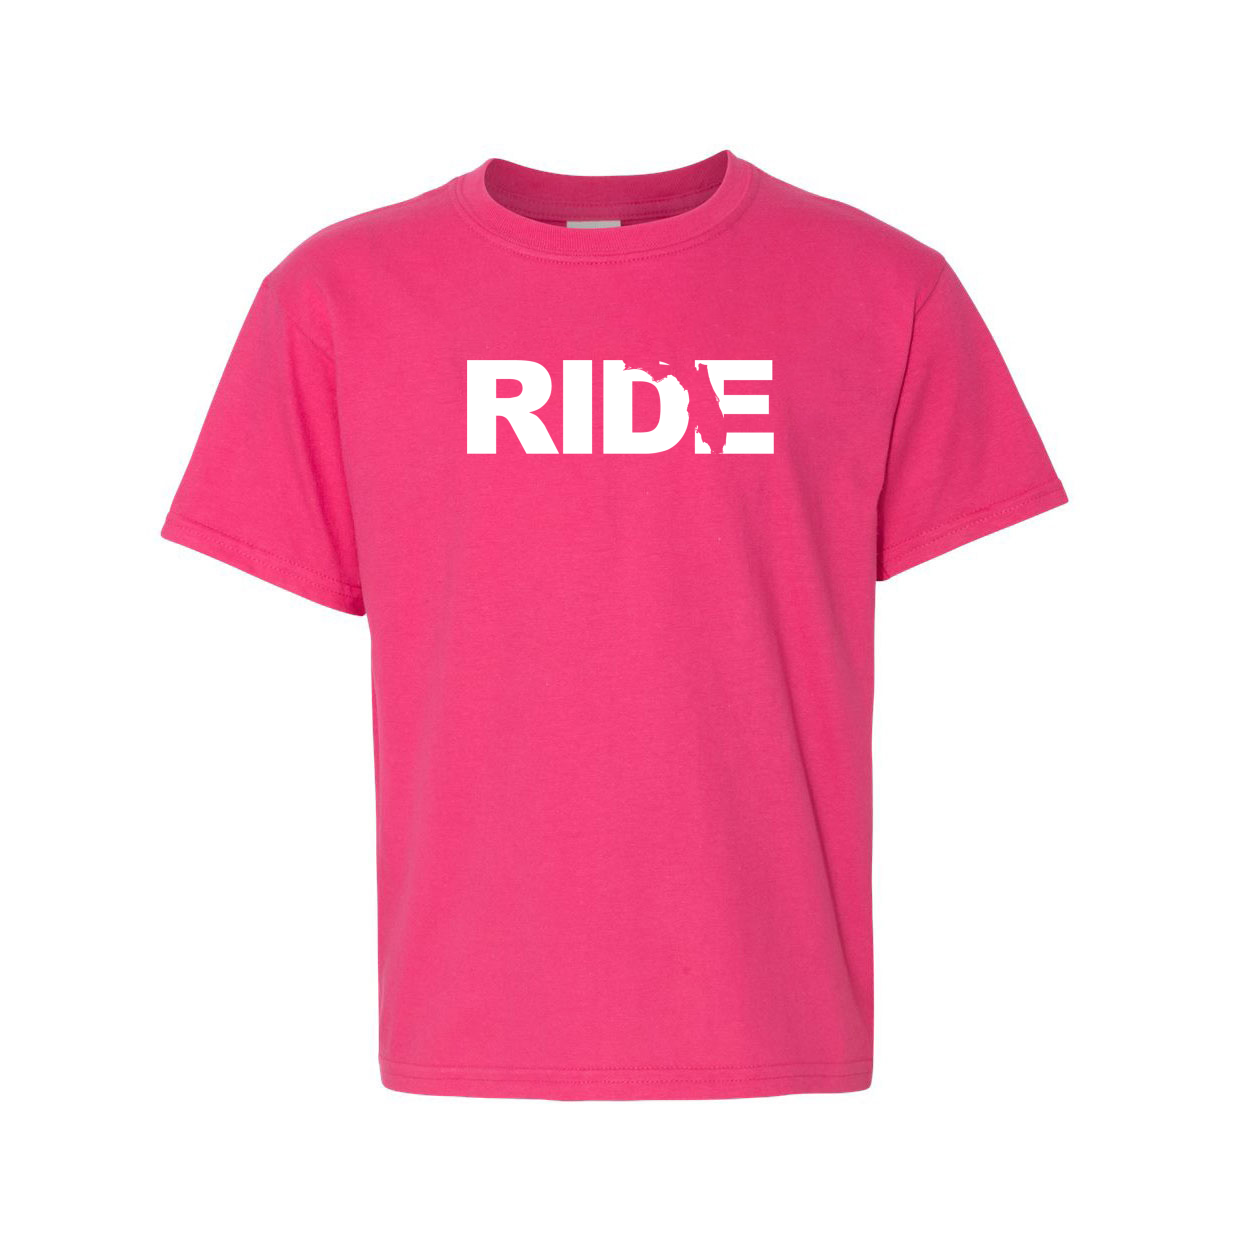 Ride Florida Classic Youth T-Shirt Pink